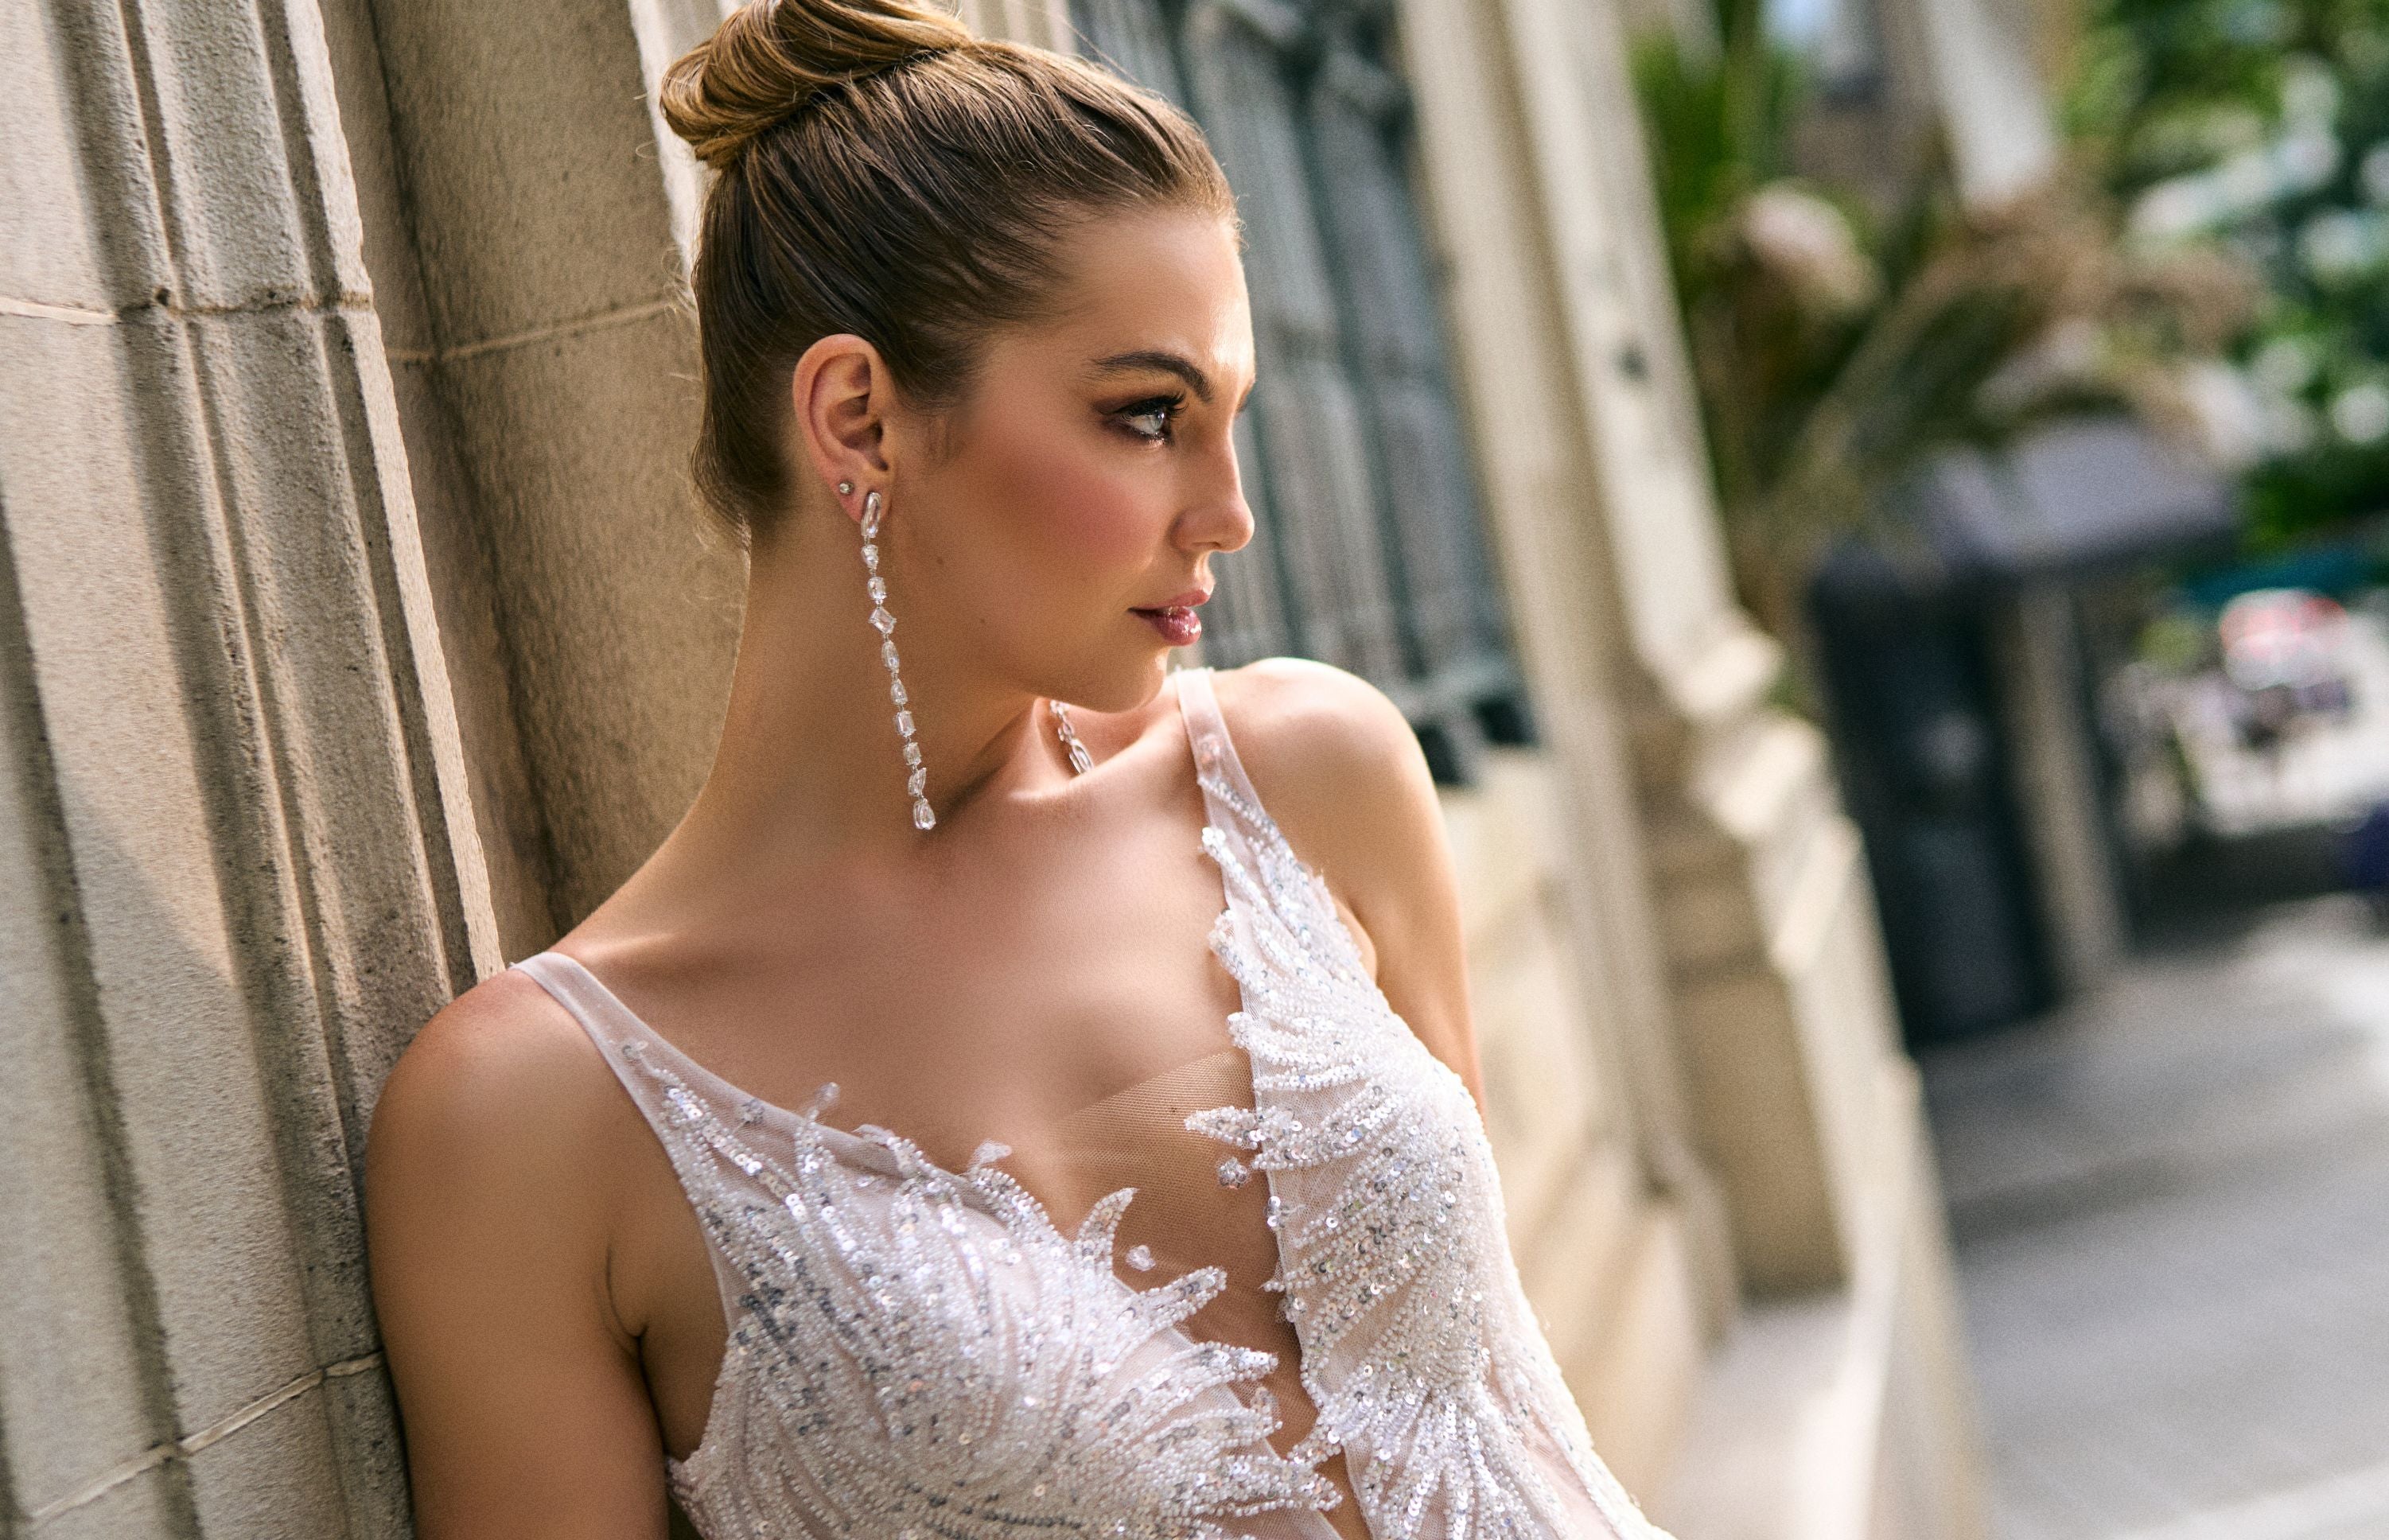 Close up of plunging front neckline. Illusion mesh neckline with sequined and beaded lace over top.